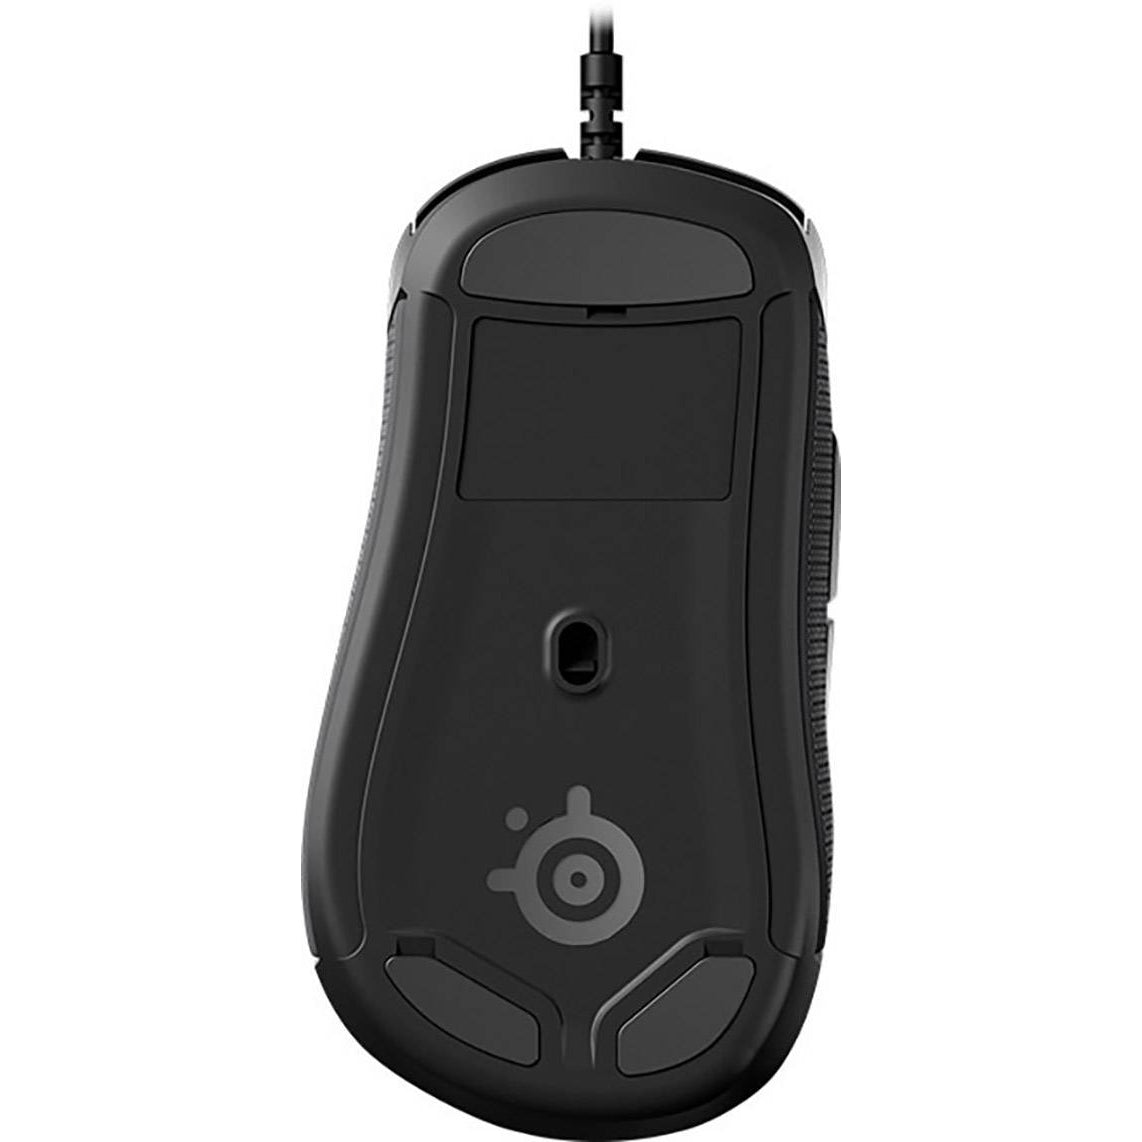 Steelseries Rival 310 Gaming Mouse Wired USB Optical, Black